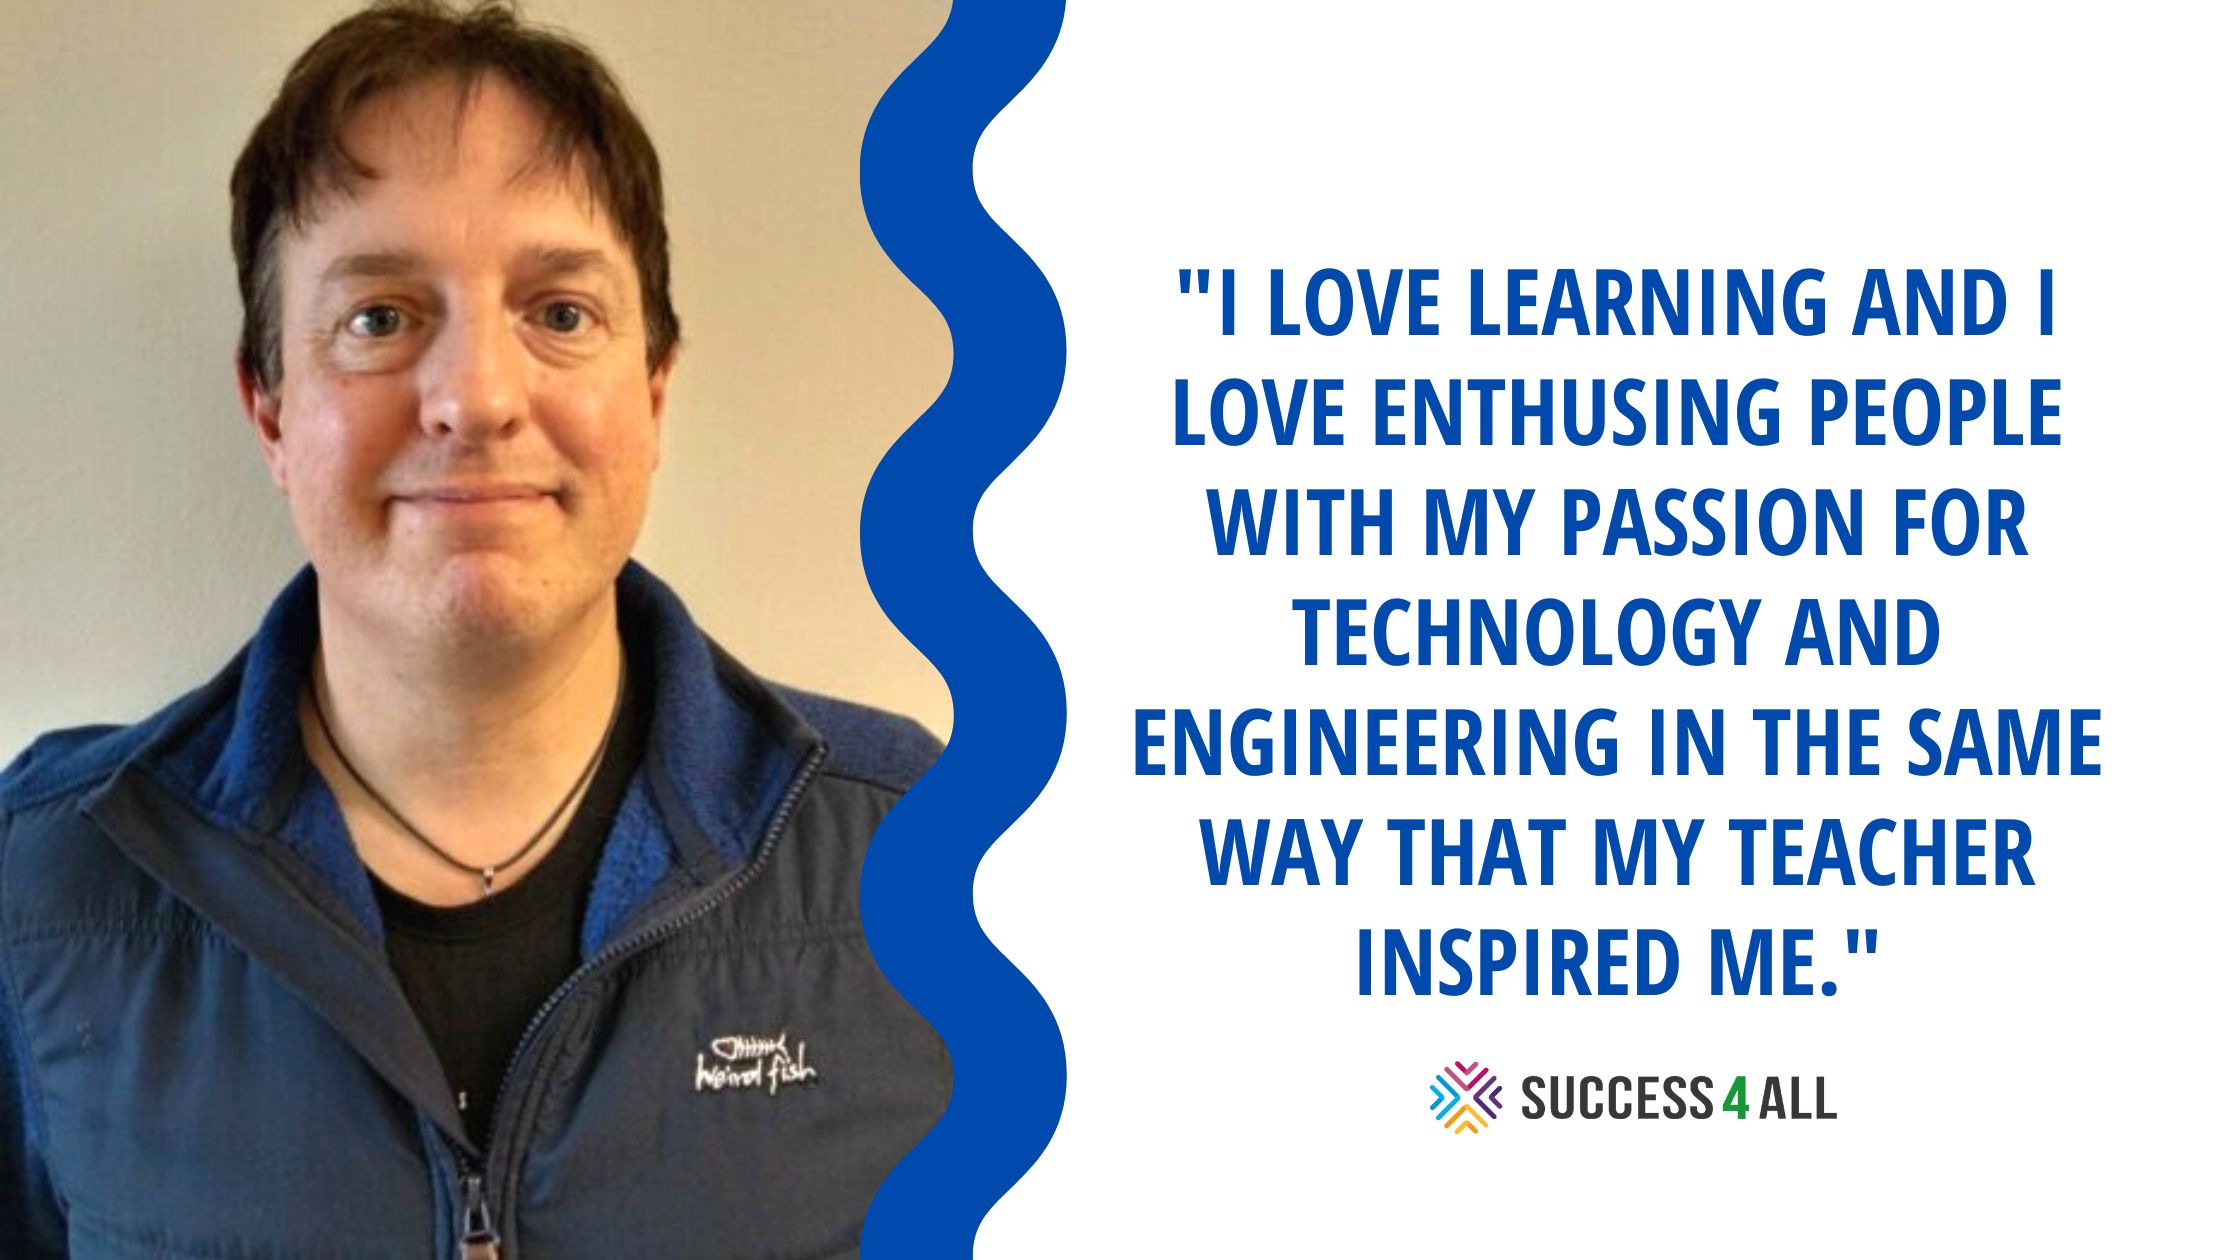 Meet our team: John Winship "I love learning and I love enthusing people with my passion for Technology and Engineering in the same way that my teacher inspired me."